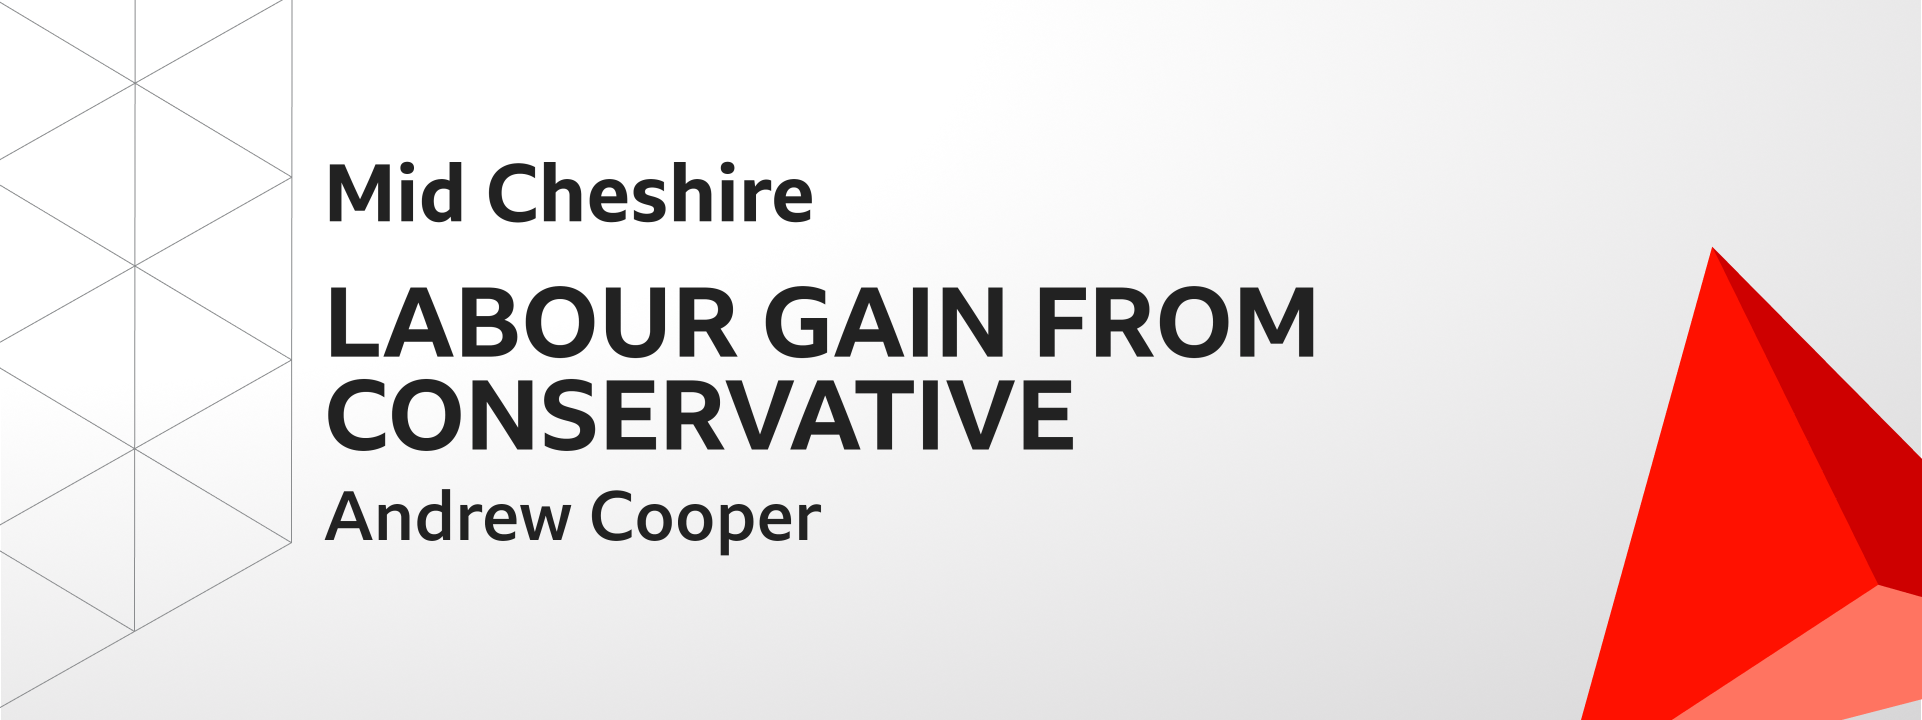 Graphic showing Labour gains Mid Cheshire from the Conservatives. The winning candidate was Andrew Cooper.